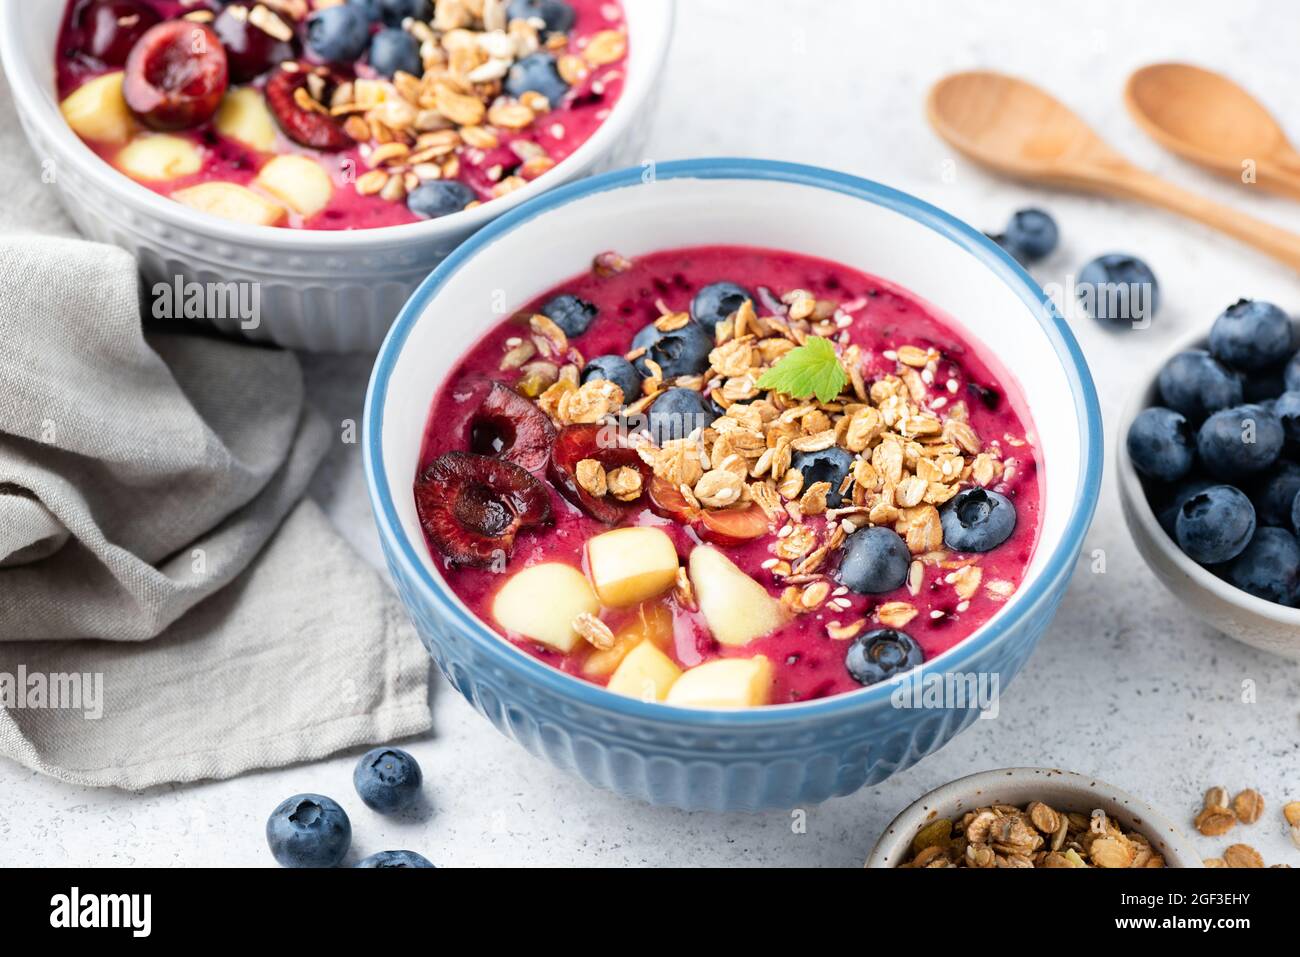 Superfood smoothie bowl with granola and berry topping. Low calorie vegan detox meal Stock Photo